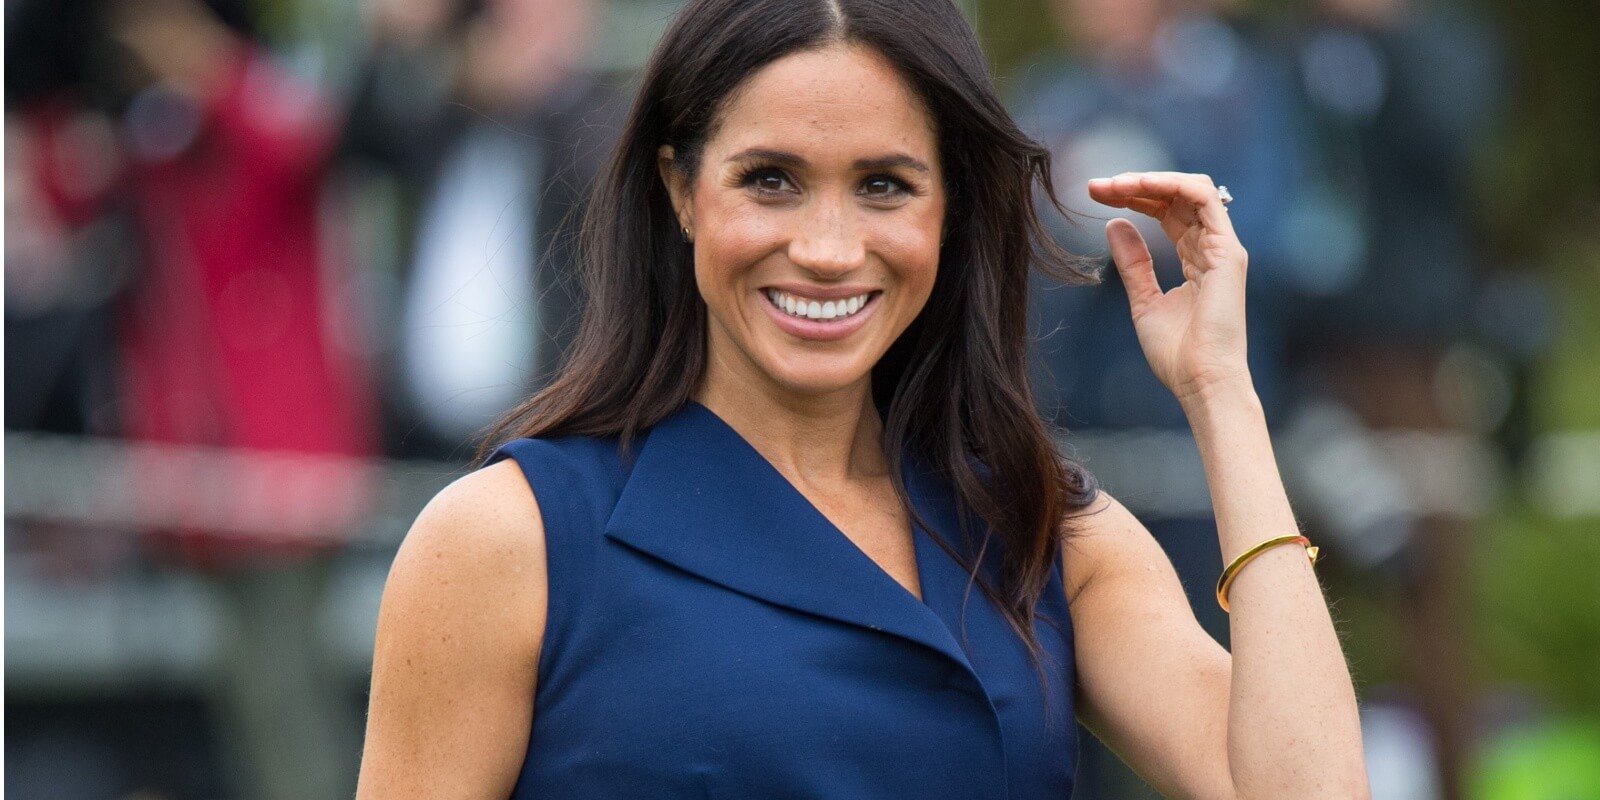 Meghan Markle attends a reception at Government House on October 18, 2018 in Melbourne, Australia.